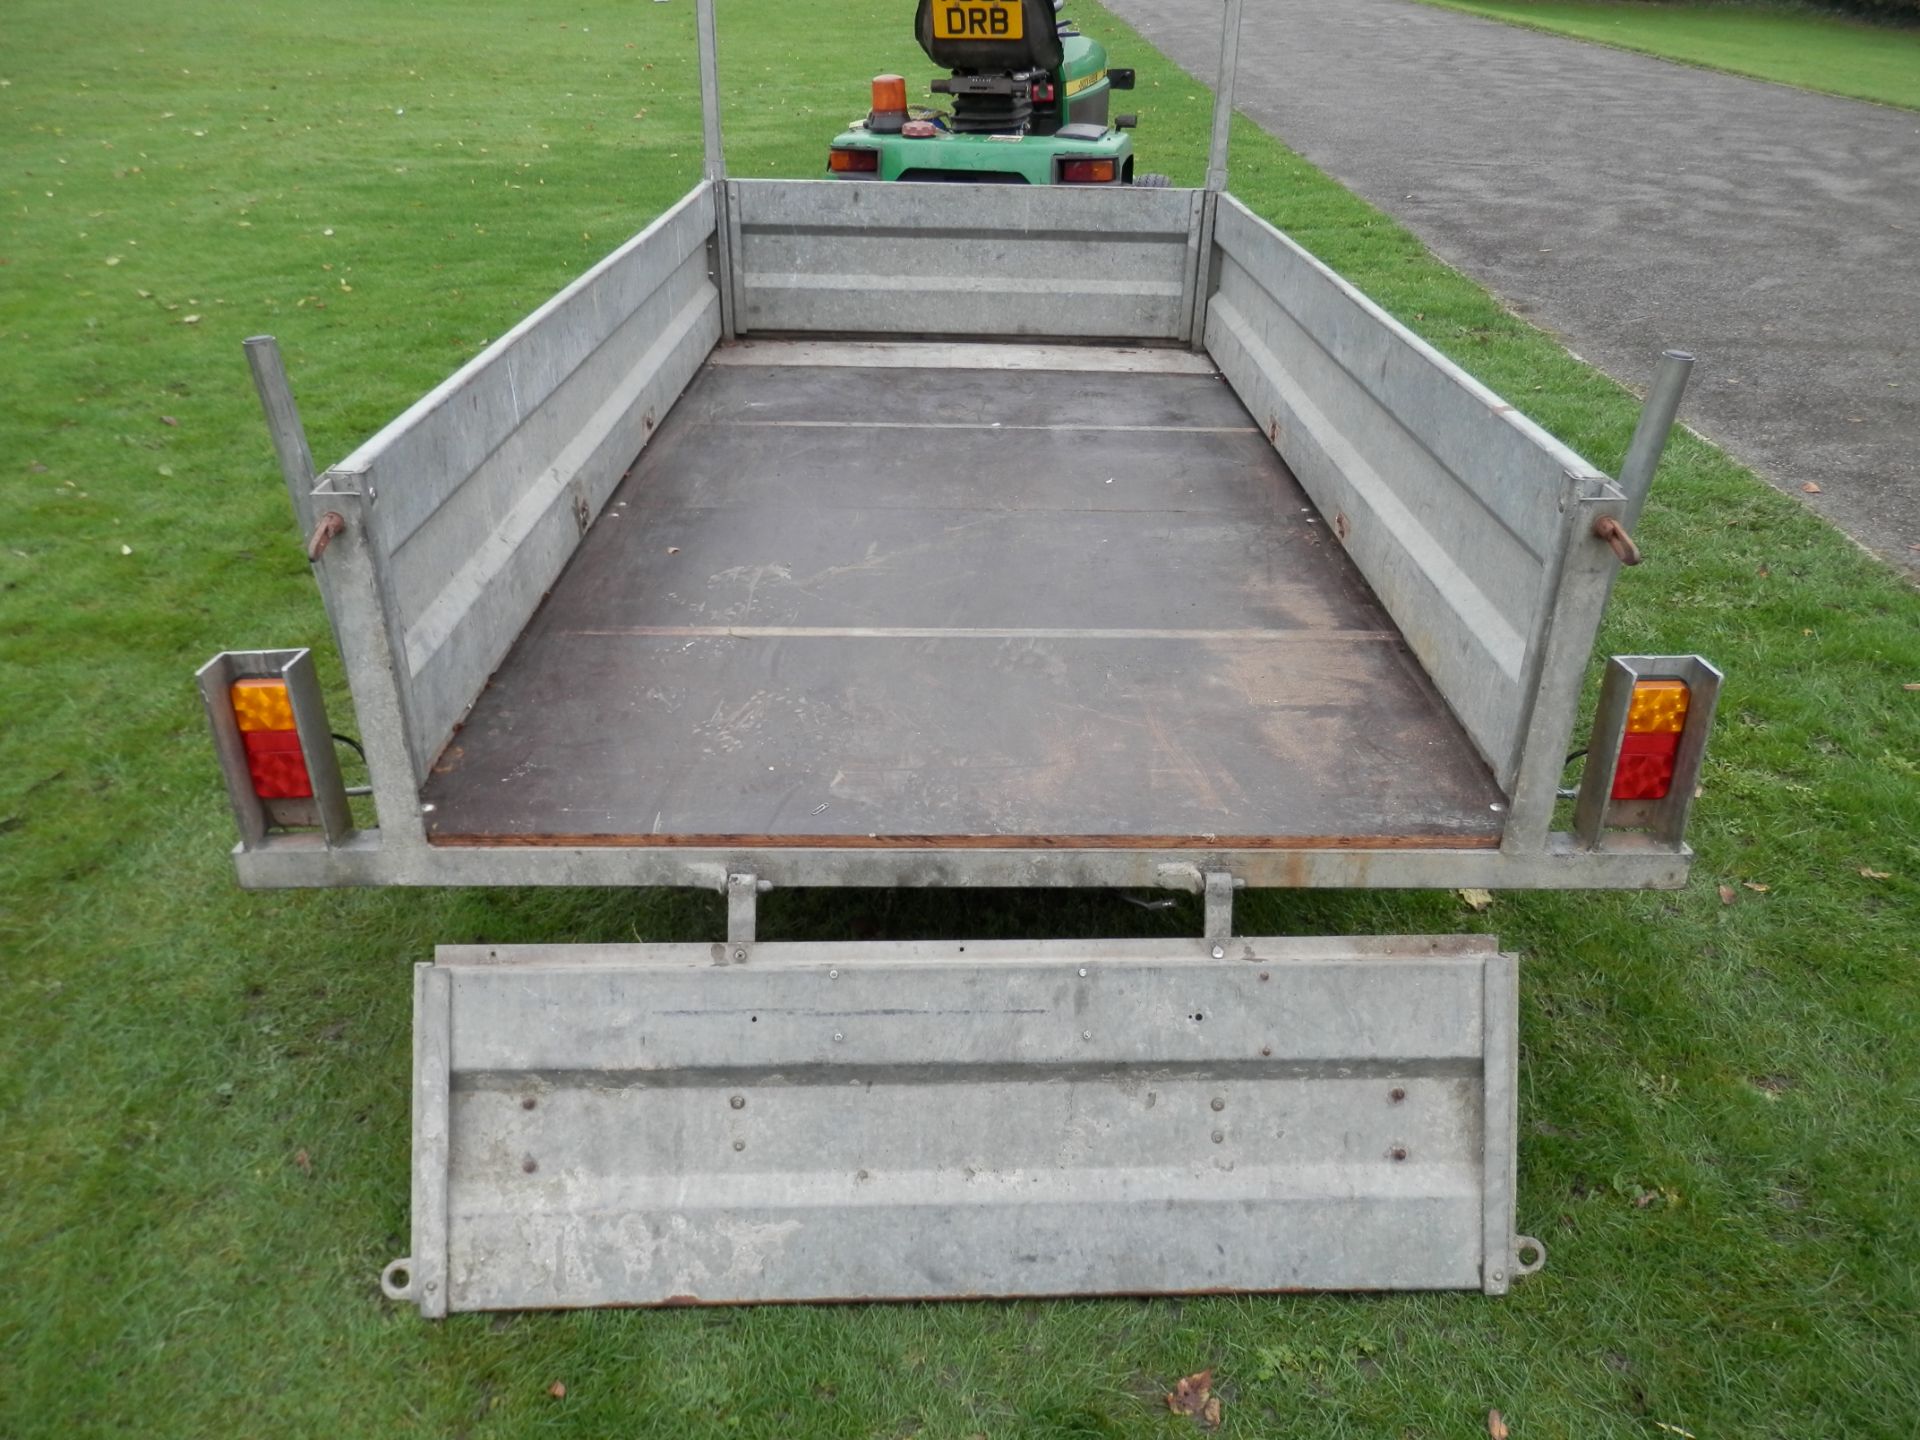 GOOD SOLID 8 X 4' GALVANIZED TRAILER, 1.5 TONNE. DROP REAR FOR EASY LOADING. - Image 5 of 9